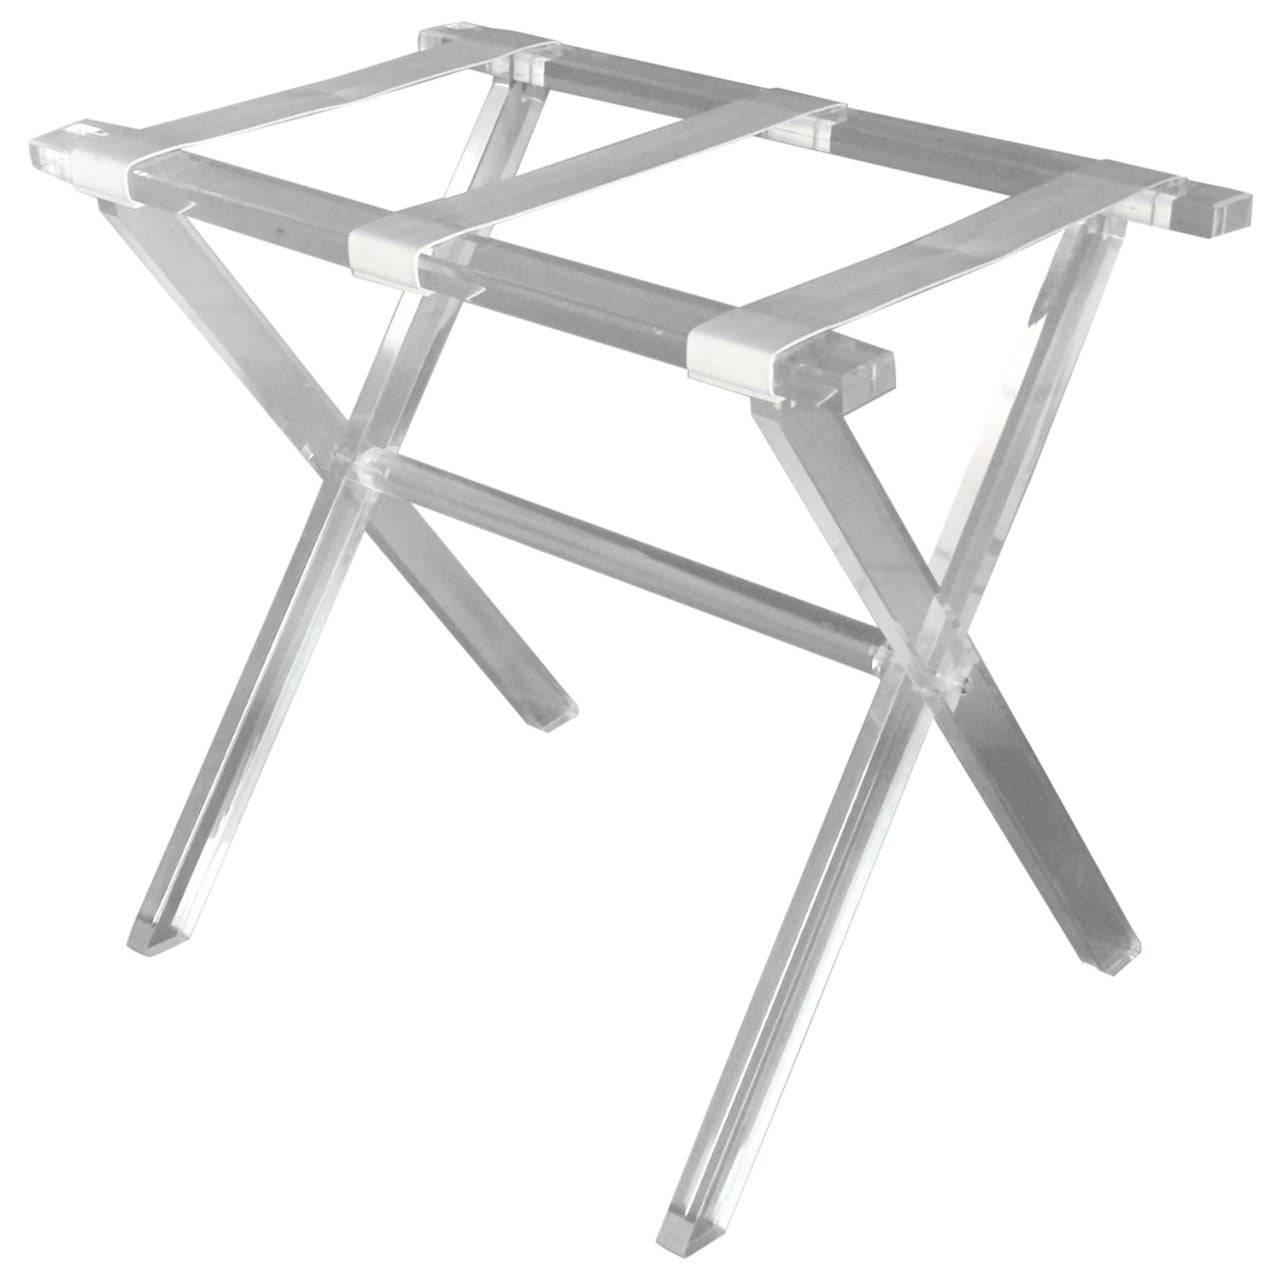 Folding Lucite Luggage Stand